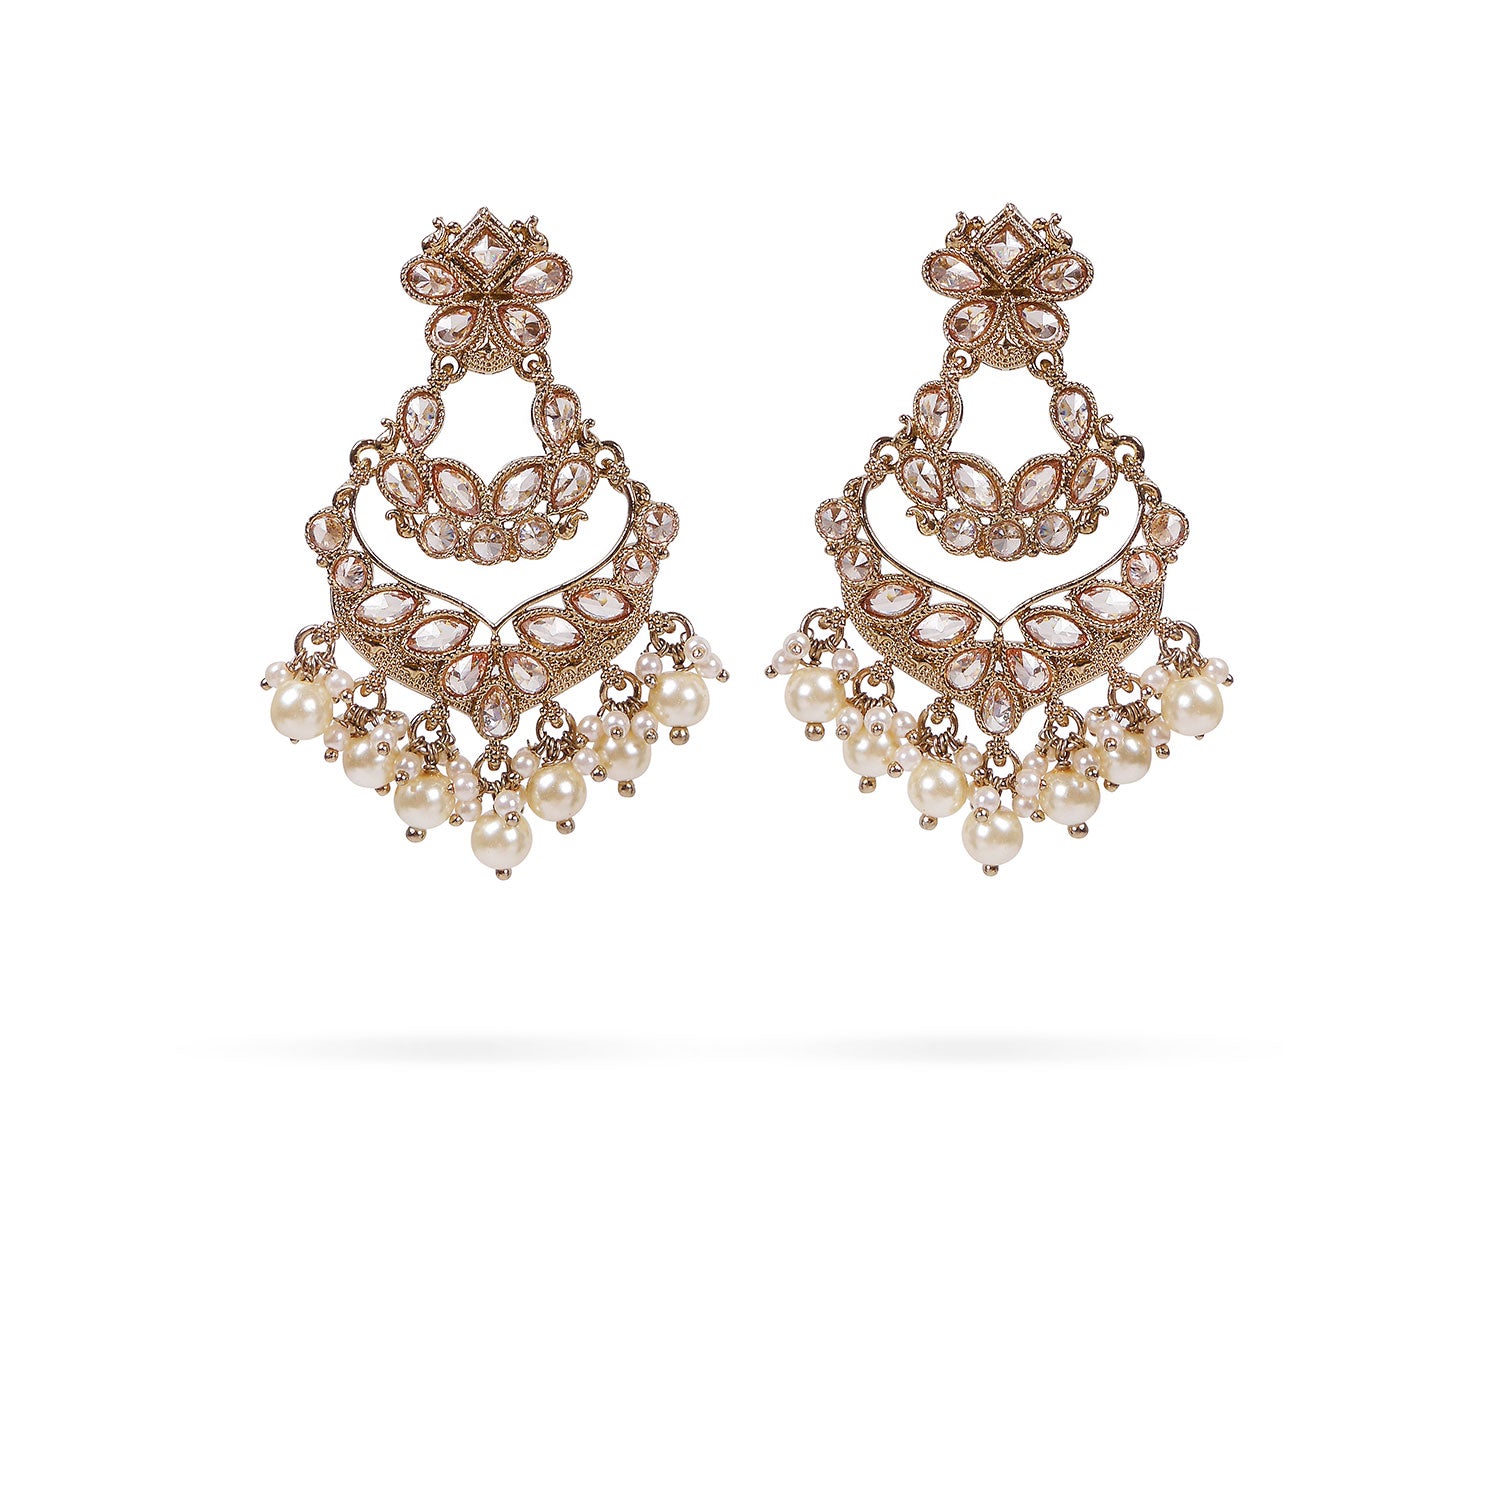 Double Layer Chandbali Earrings in Pearl and Antique Gold